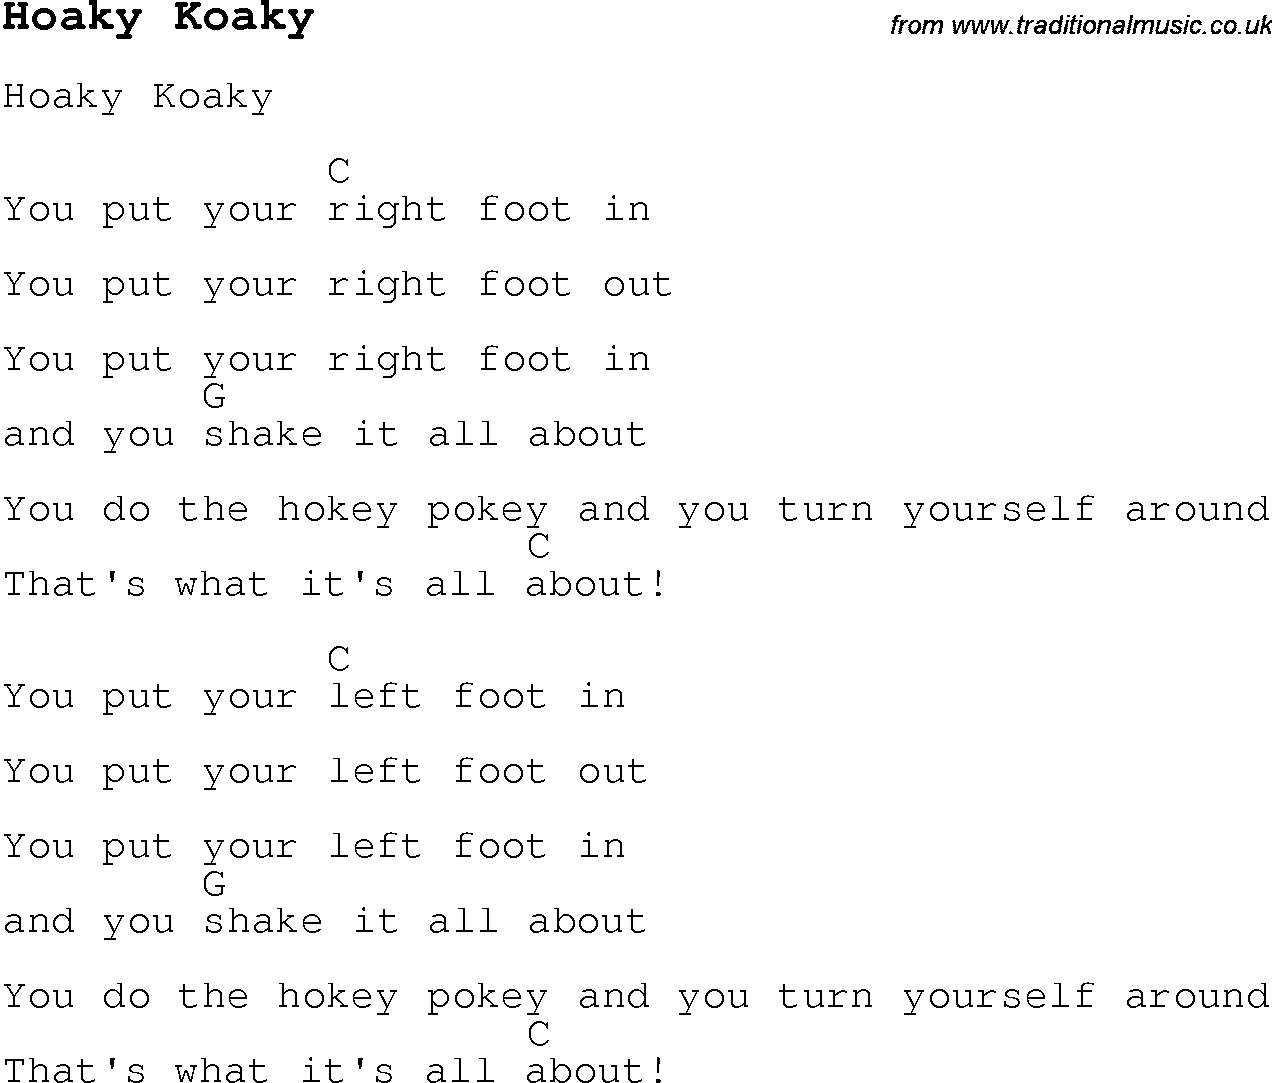 Childrens Songs and Nursery Rhymes, lyrics with chords for guitar, banjo etc for song hoaky-koaky